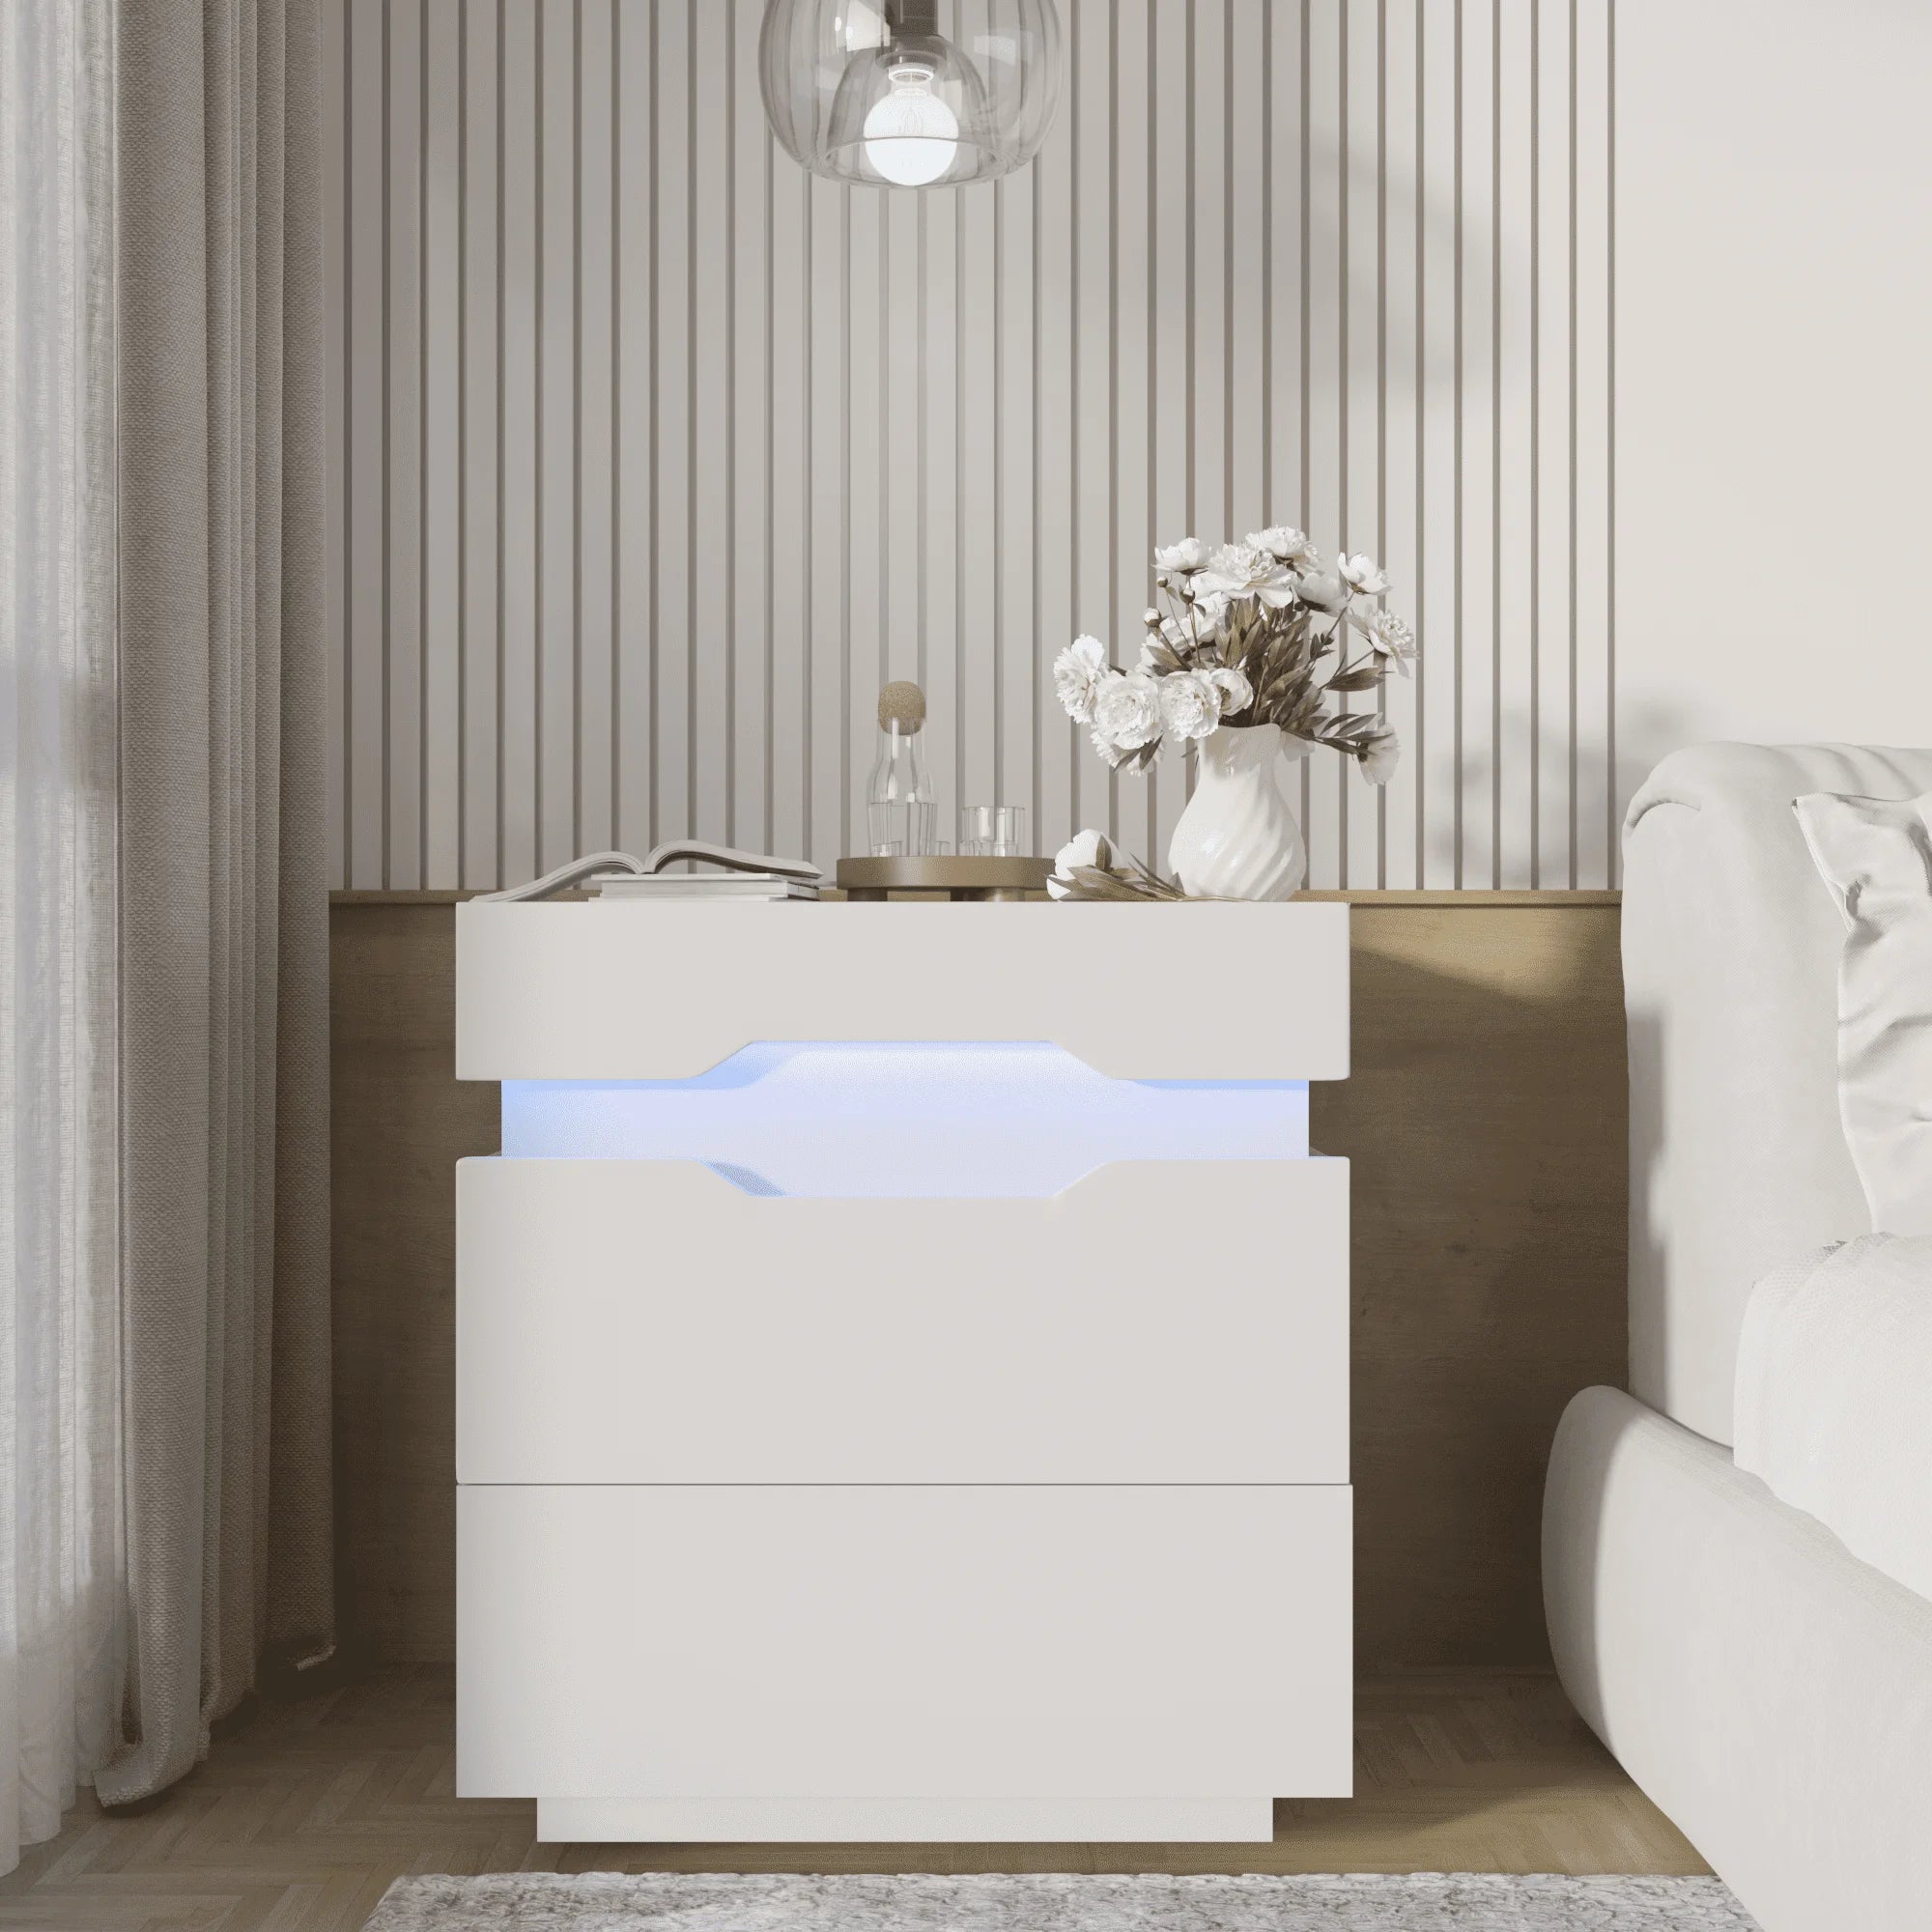 2 Drawer LED Nightstand with Remote and Charging Ports